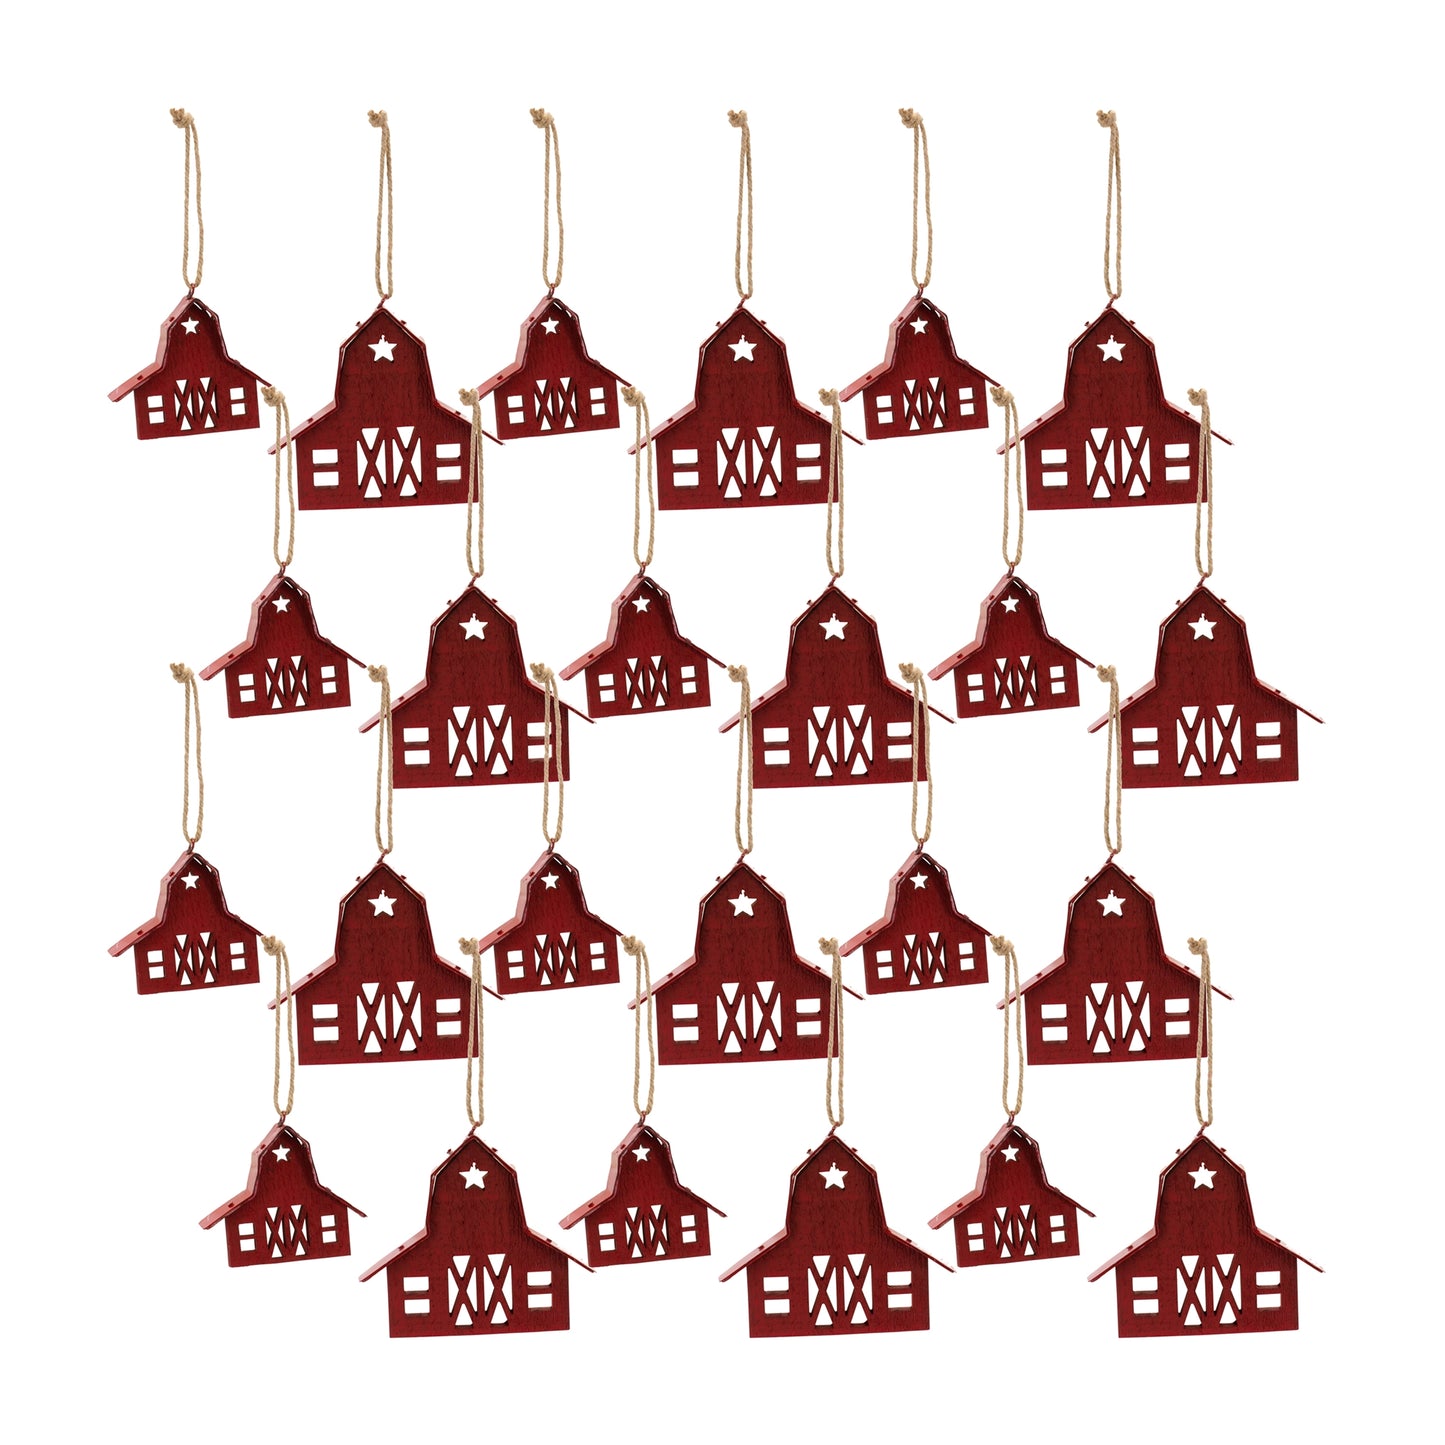 Rustic Wooden Barn Ornament with Metal Accent and Jute Hanger (Set of 24)